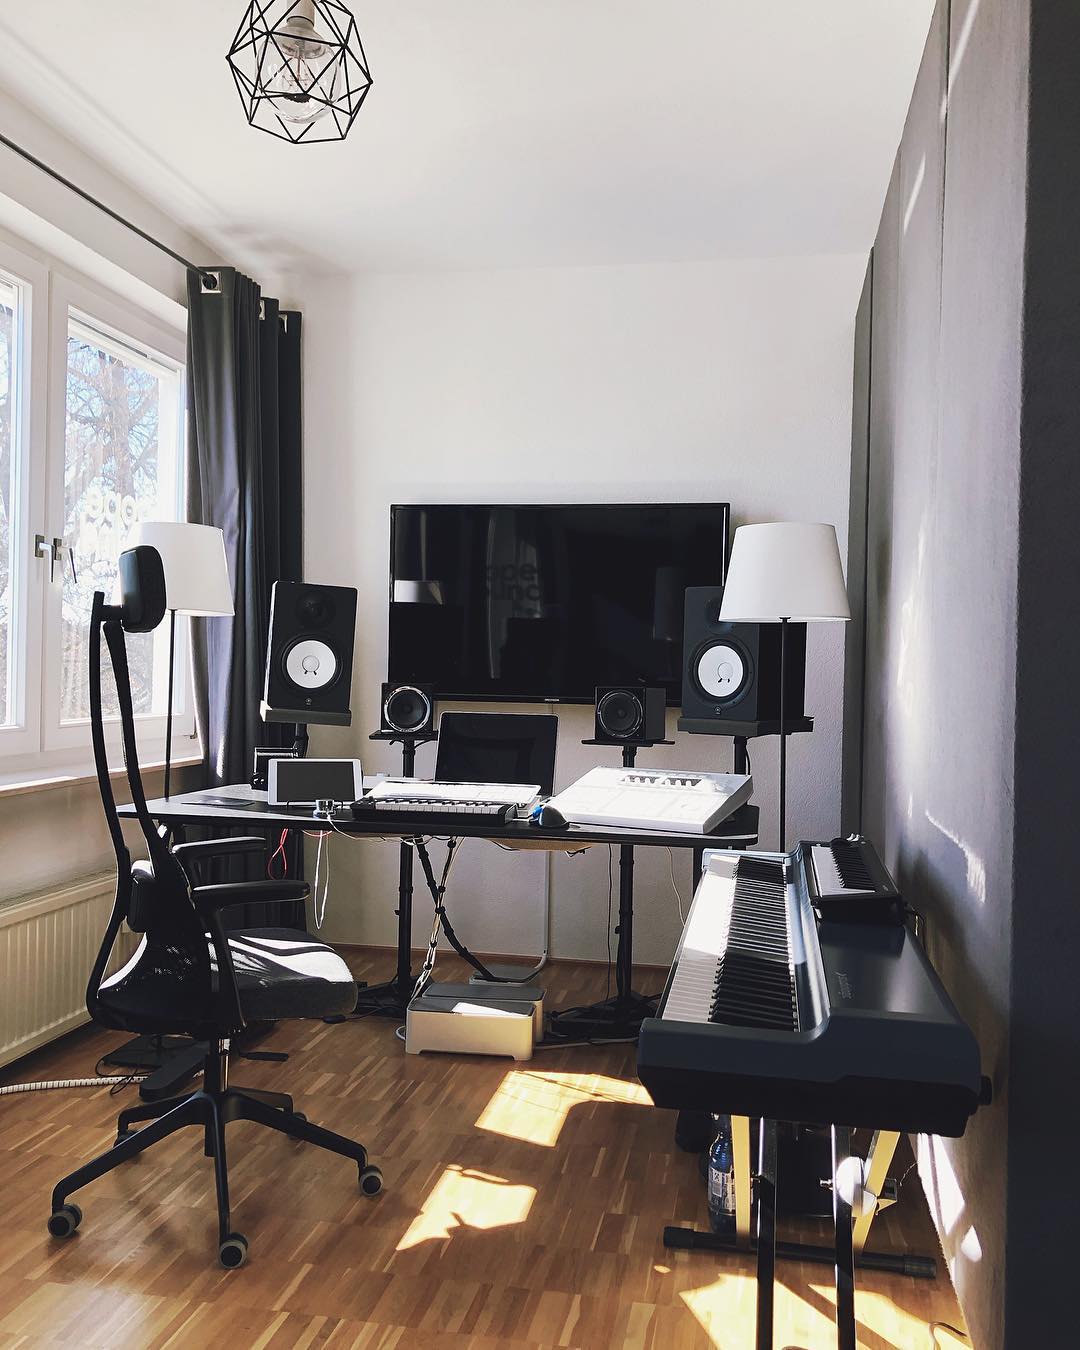 Home music studio with computer on wall and dark soundproof dividers photo by Instagram user @dopesoundstudio